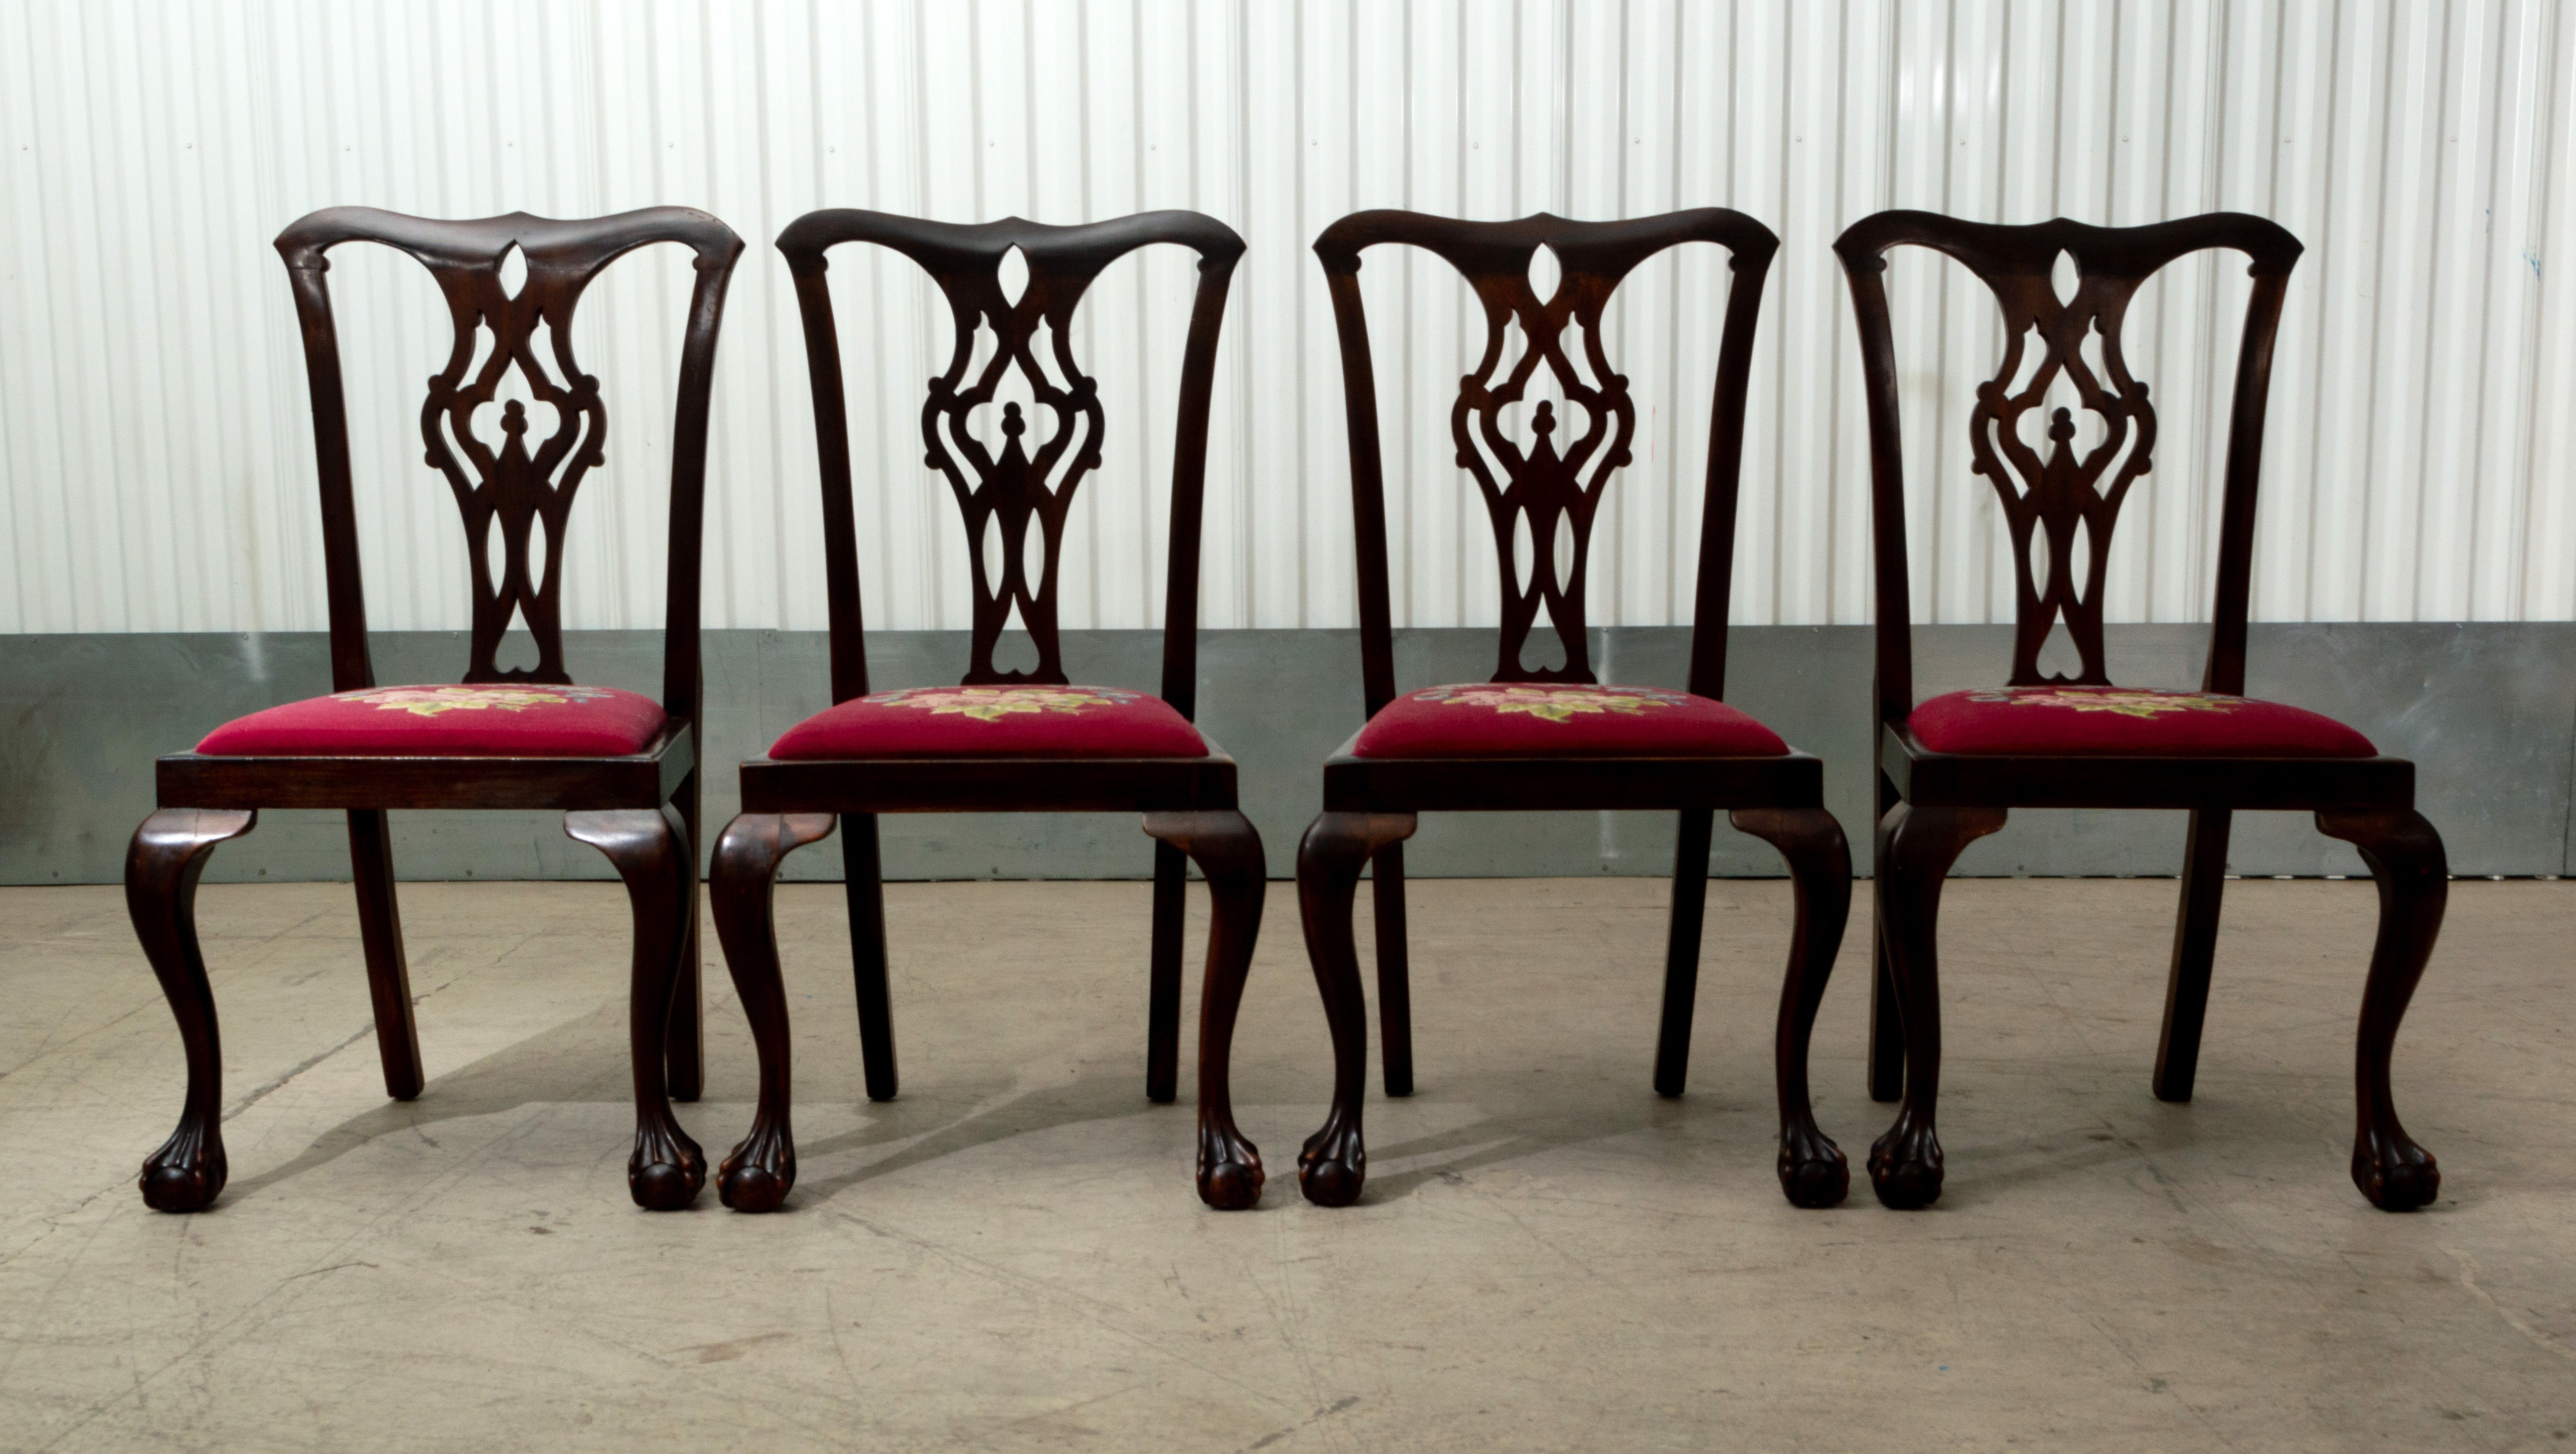 4 Antique English 19th century Chippendale revival mahogany chairs. 
circa 1890.

A Fine set of four Chippendale revival mahogany chairs with elaborately carved pierced lattice work splats, each raised on cabriole legs with ball and claw